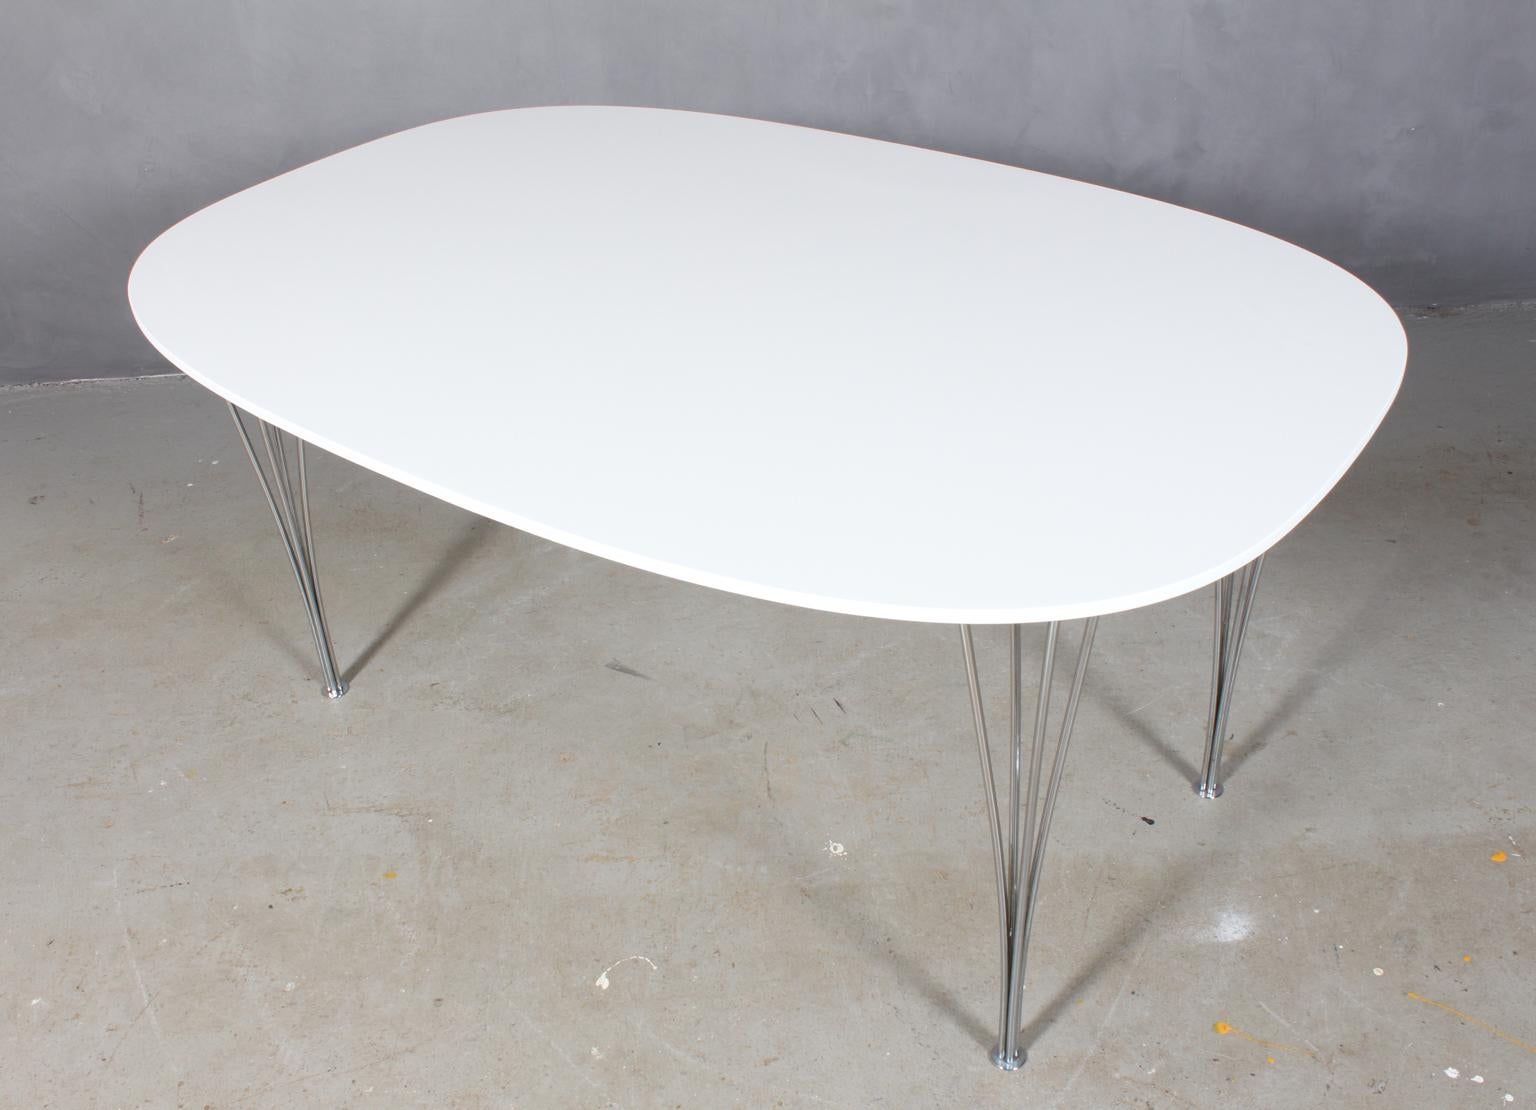 Piet Hein & Bruno Mathsson Elipse dining table white lacquered.

Legs in chromed steel.

Made by Fritz Hansen.

New lacquered by professional car painter.